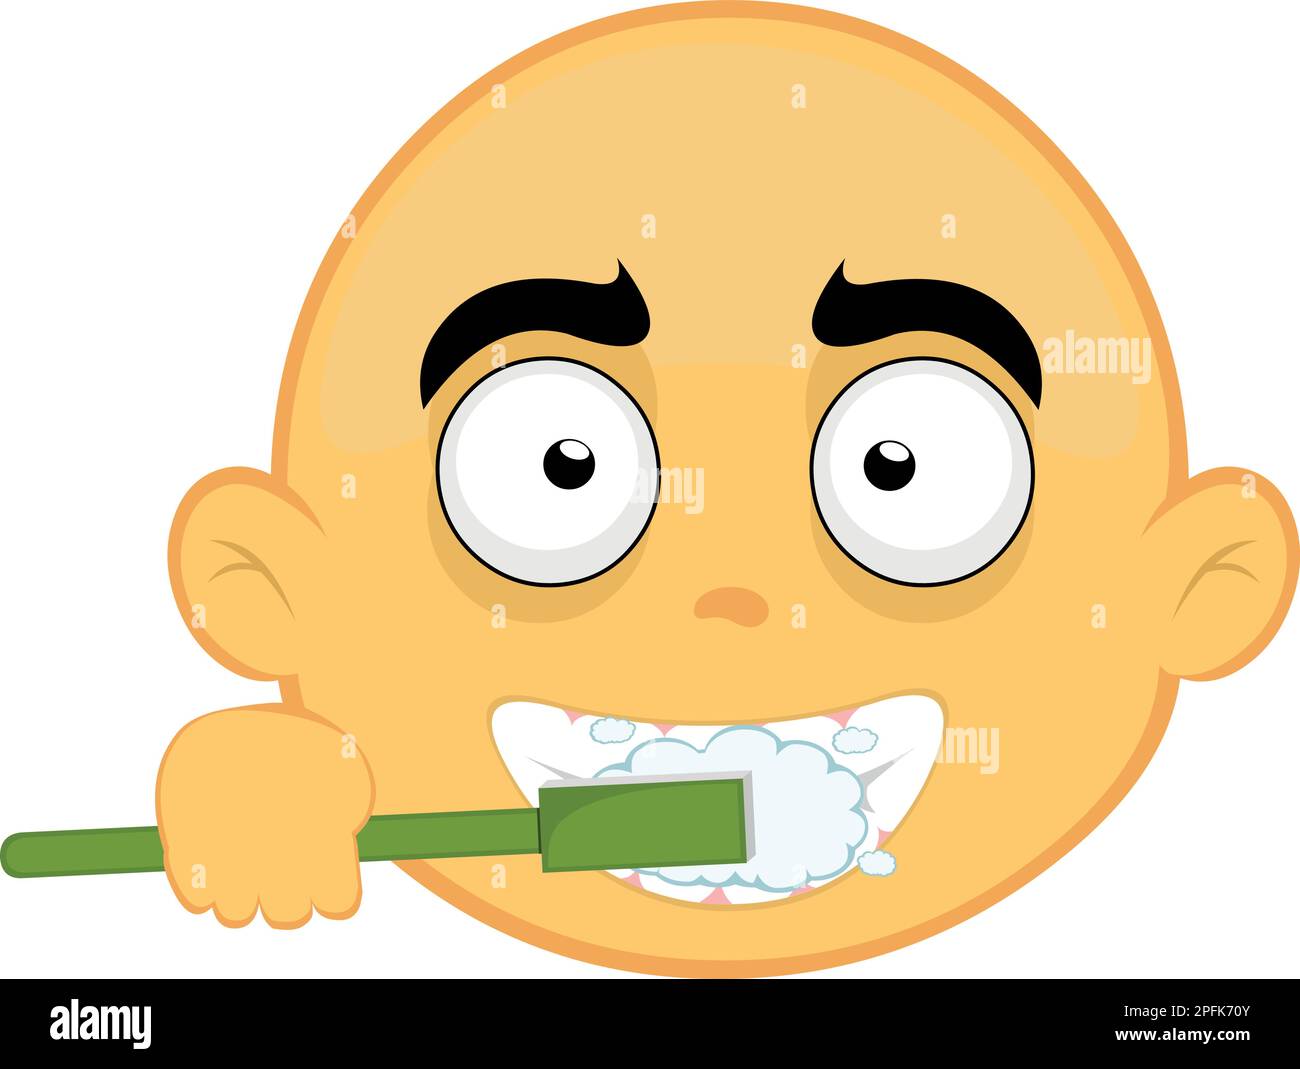 vector illustration emoticon face of a cartoon character in yellow ...